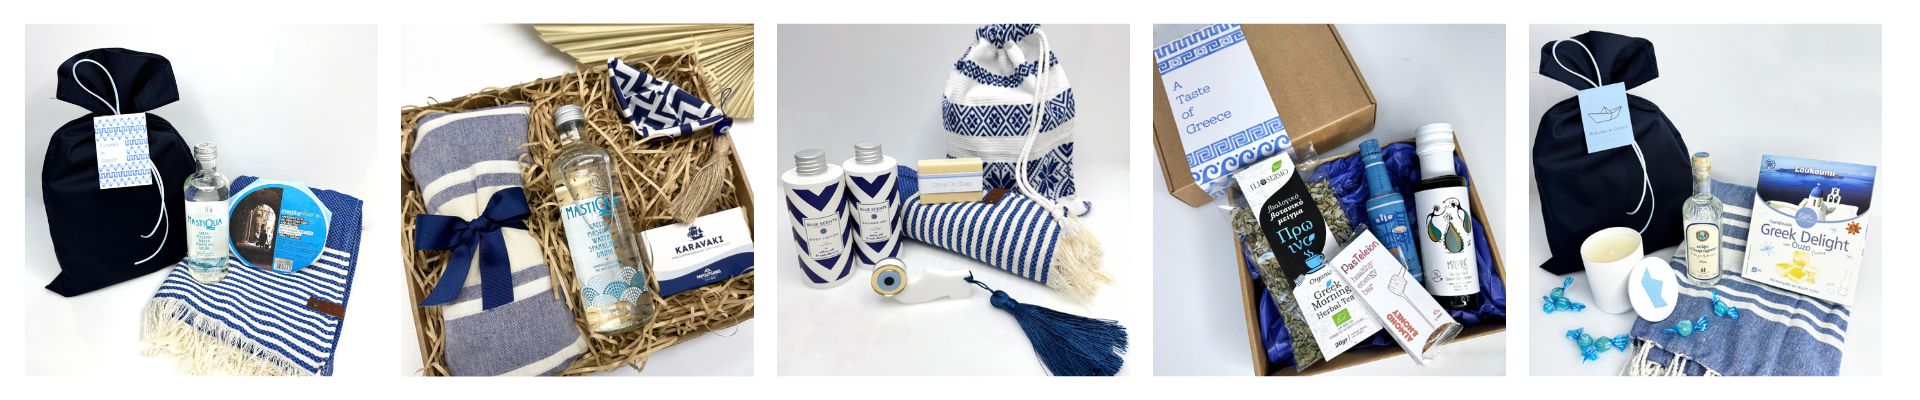 Greek Gifts, Conference Gifts, Corporate Gifts, Custom Greek Gifts,  mycretangoods